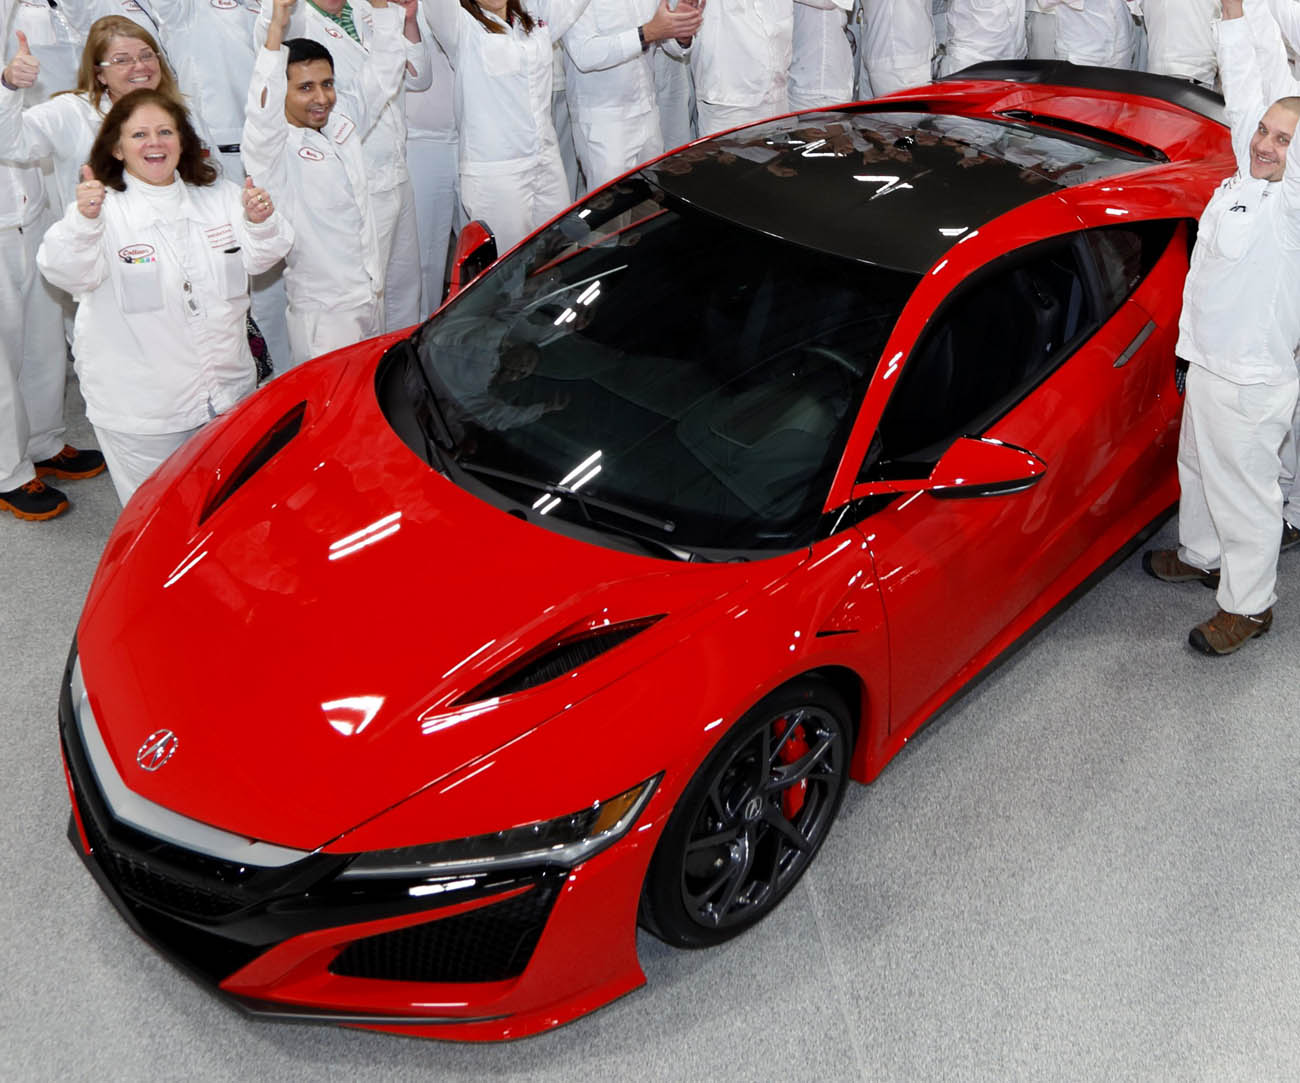 2017 Acura NSX Receives "Best of What's New" Award